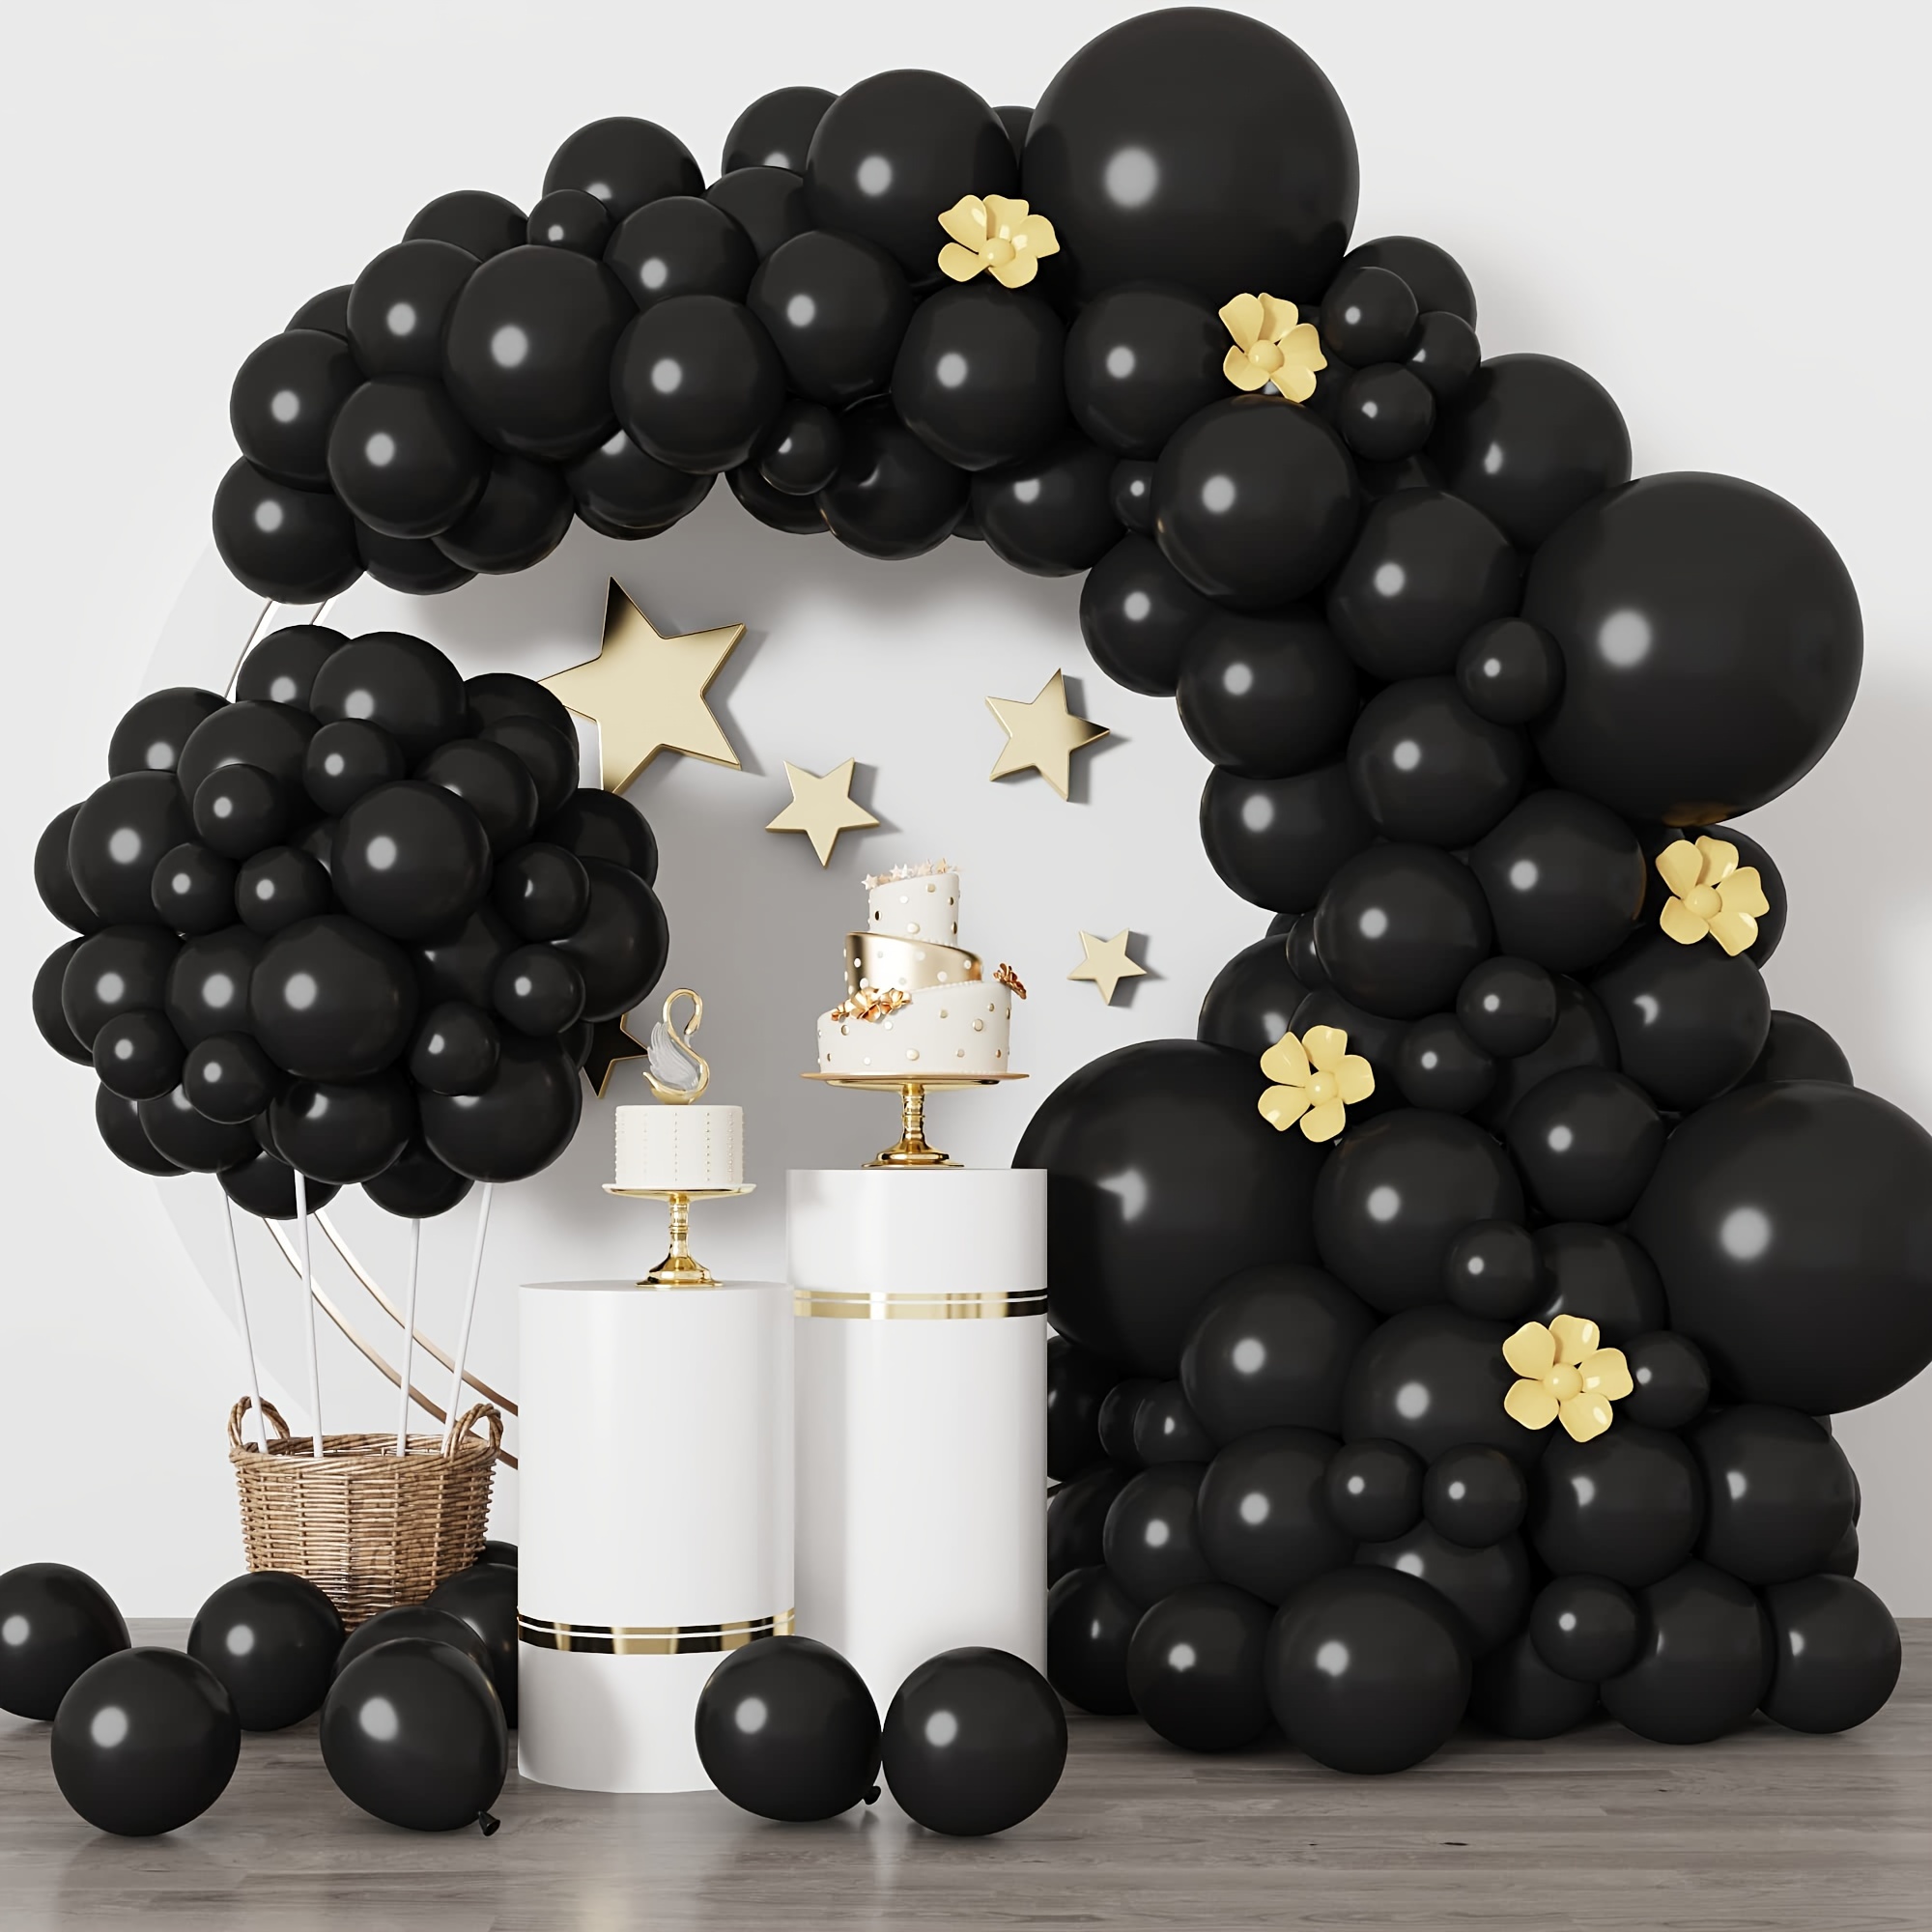 

138-piece Black Latex Balloon Set - Assorted Sizes 5", 10", 12", 18" For Weddings, Birthdays, Graduations & More - Includes Curling Ribbon, Perfect For Party Decorations